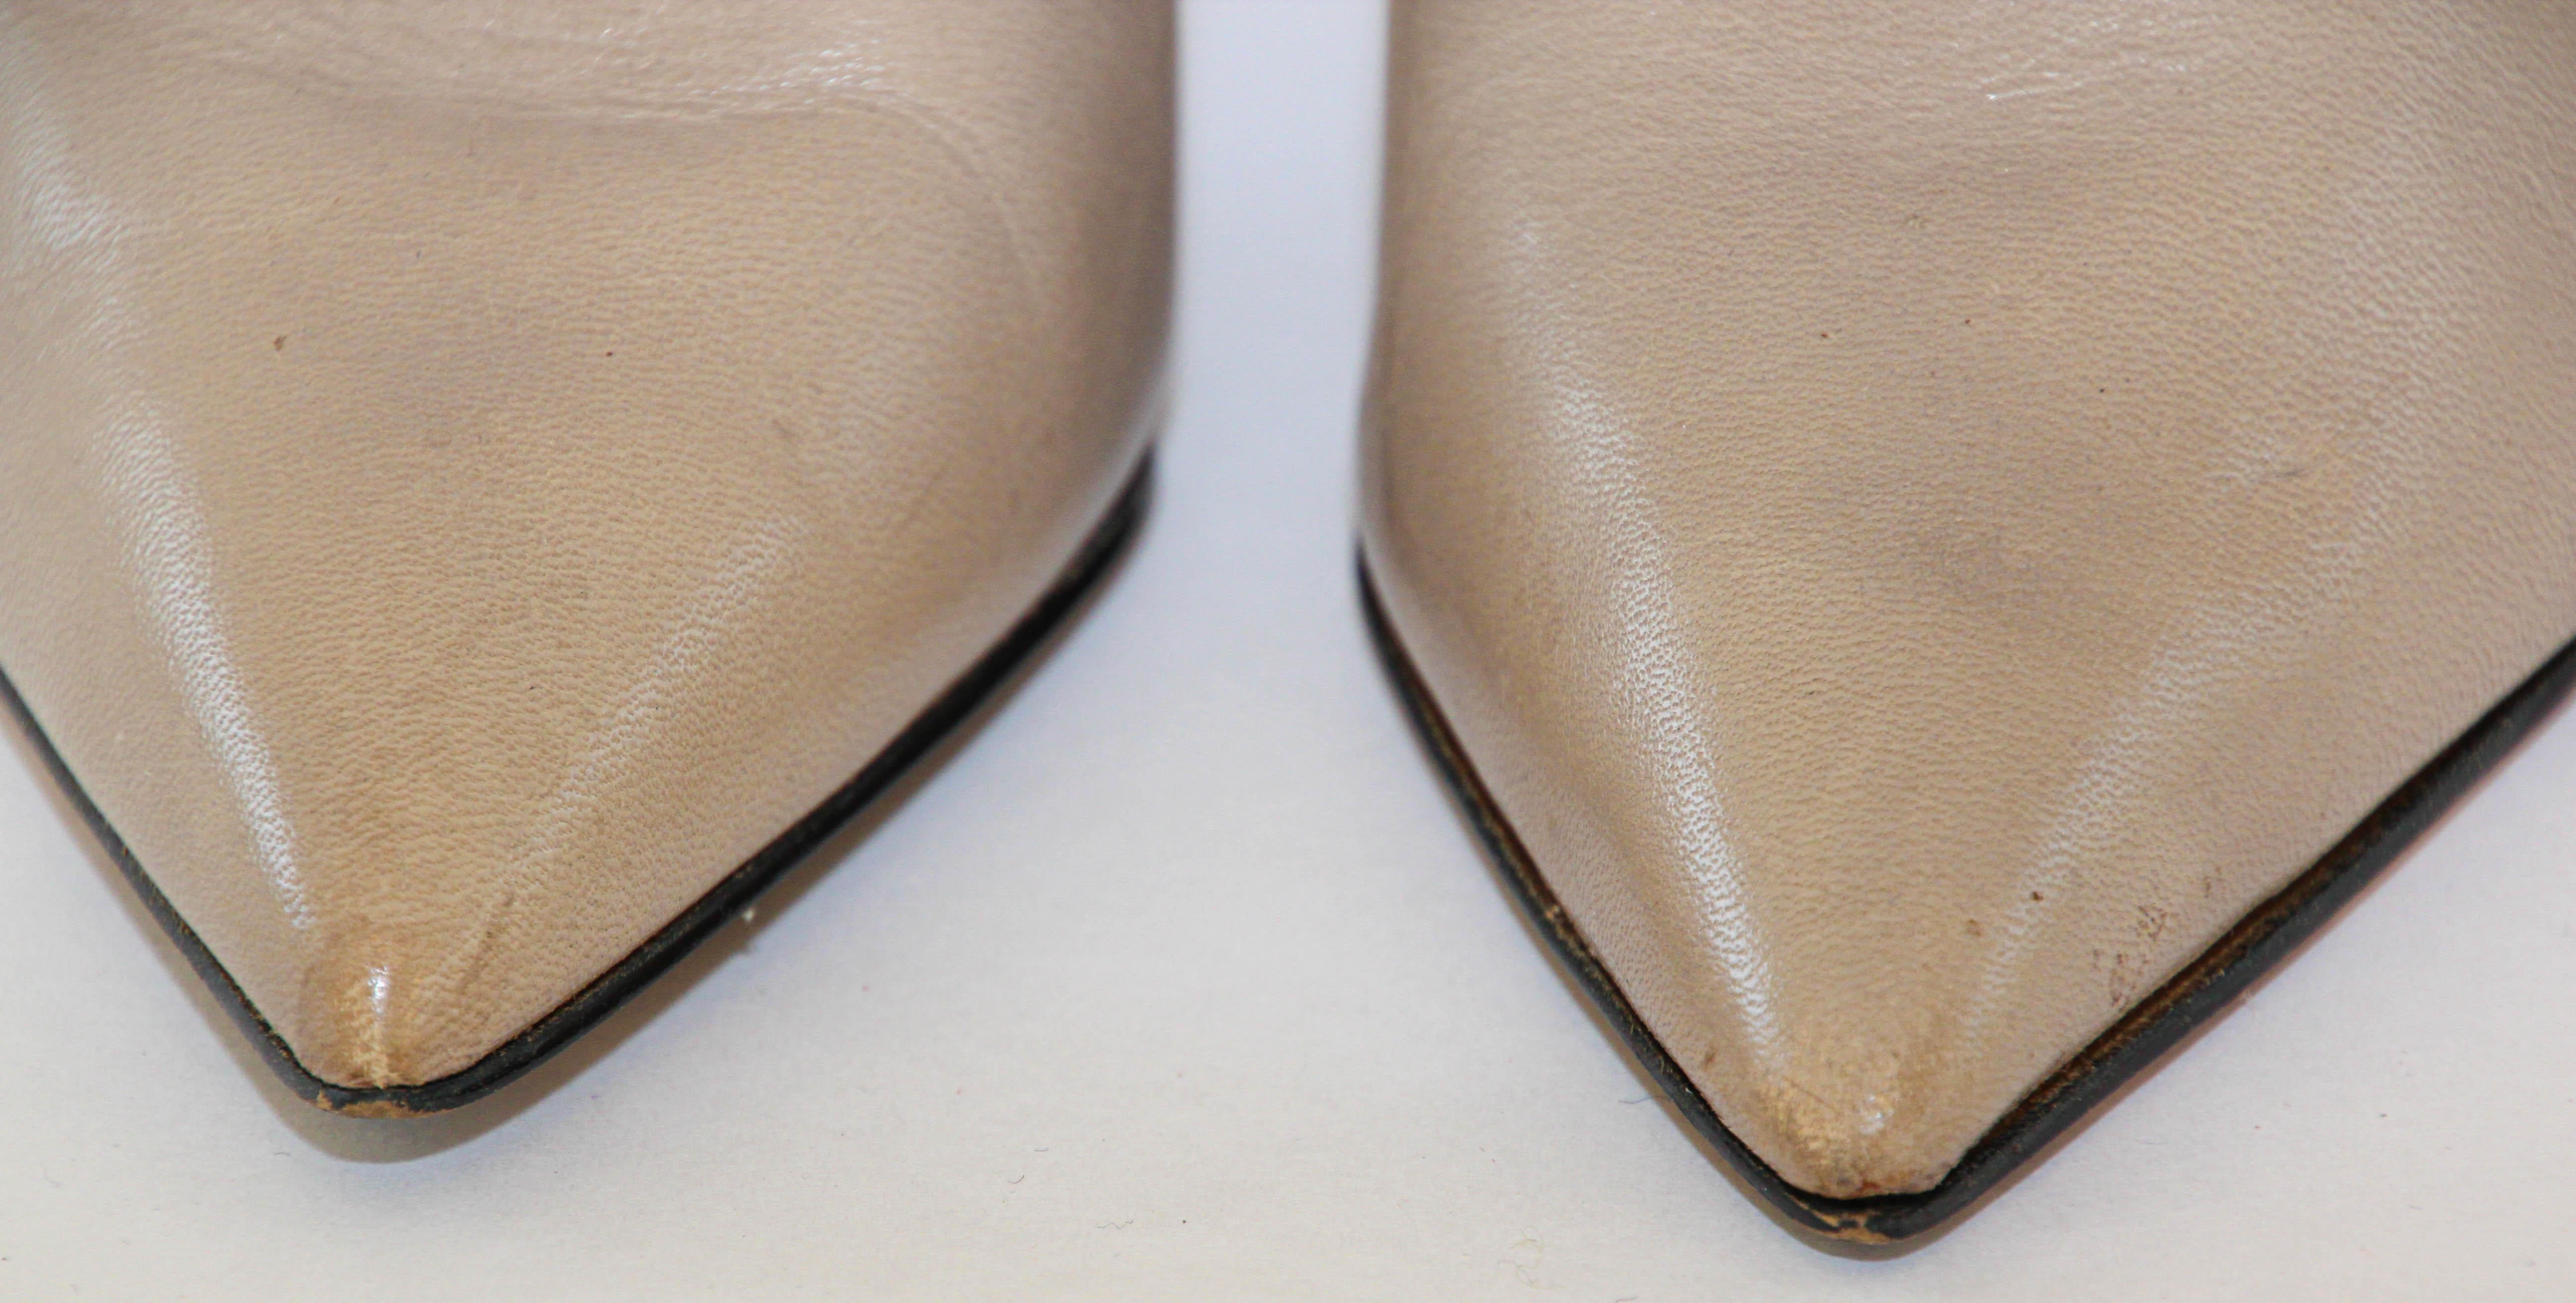 Sam Edelman High Heels Tan Leather Women Ankle Booties Stiletto Size 7 For Sale 10